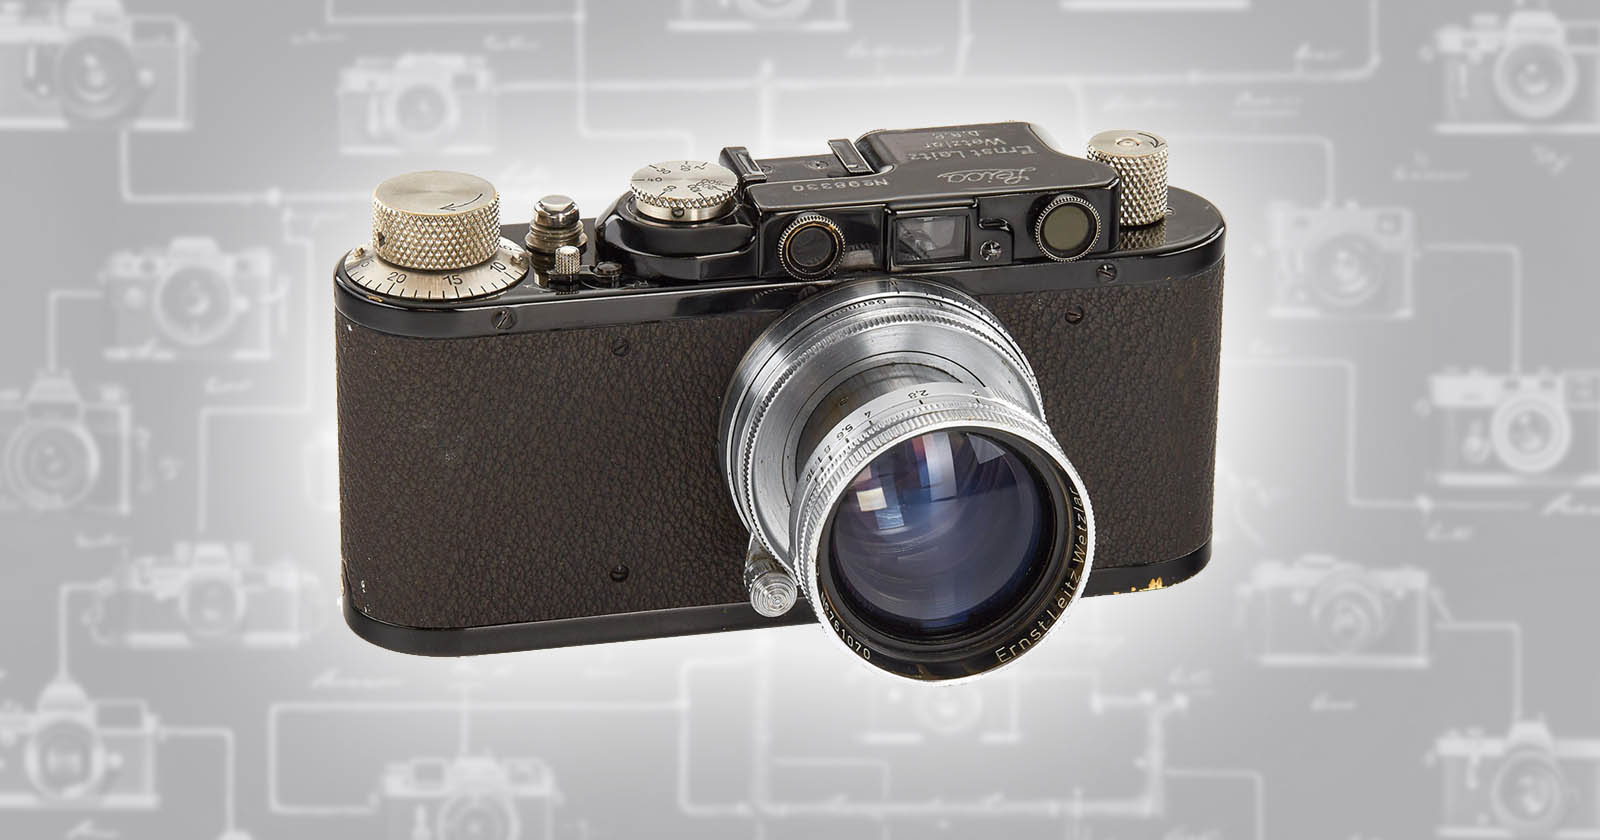 A vintage black camera with a large silver lens is displayed against a gray background featuring faint outlines of various camera models. The camera has several dials and buttons on its top surface. The lens is prominently extended towards the viewer.